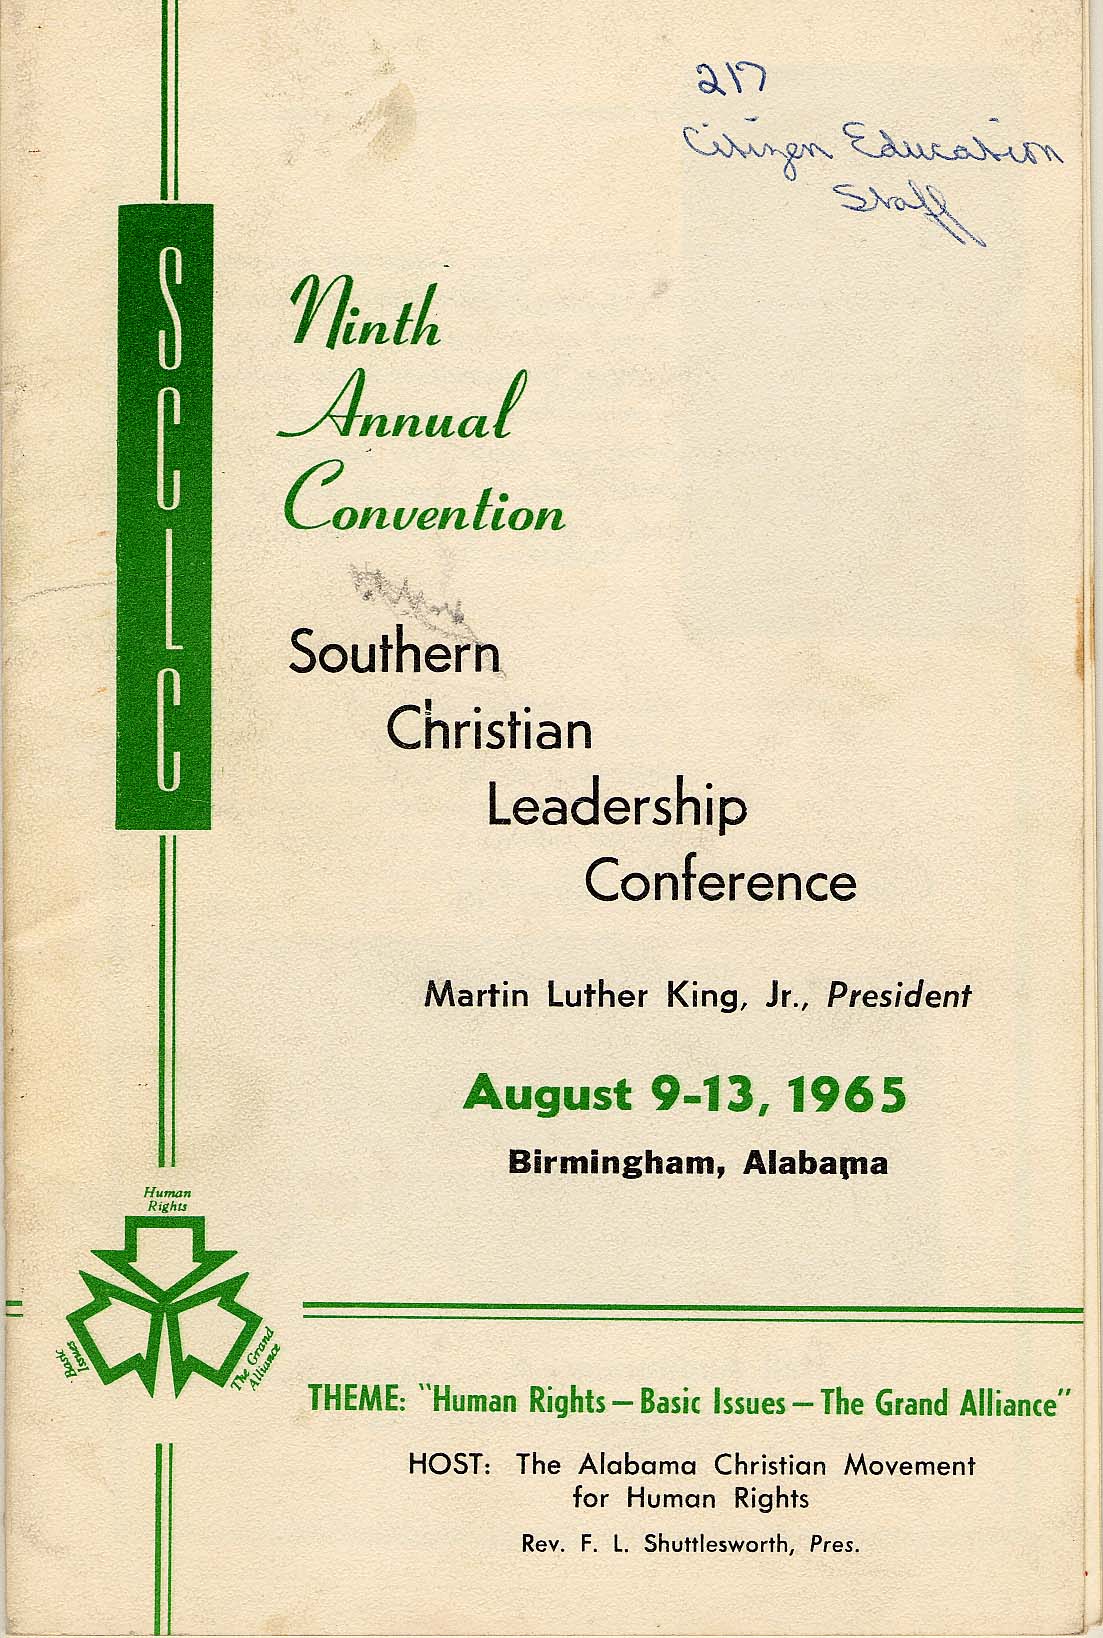 Cover of the SCLC convention booklet, Text reads: Ninth Annual Convention. Southern Christian Leadership Conference. Martin Luther King Jr. President. Aug. 9-13, 1965